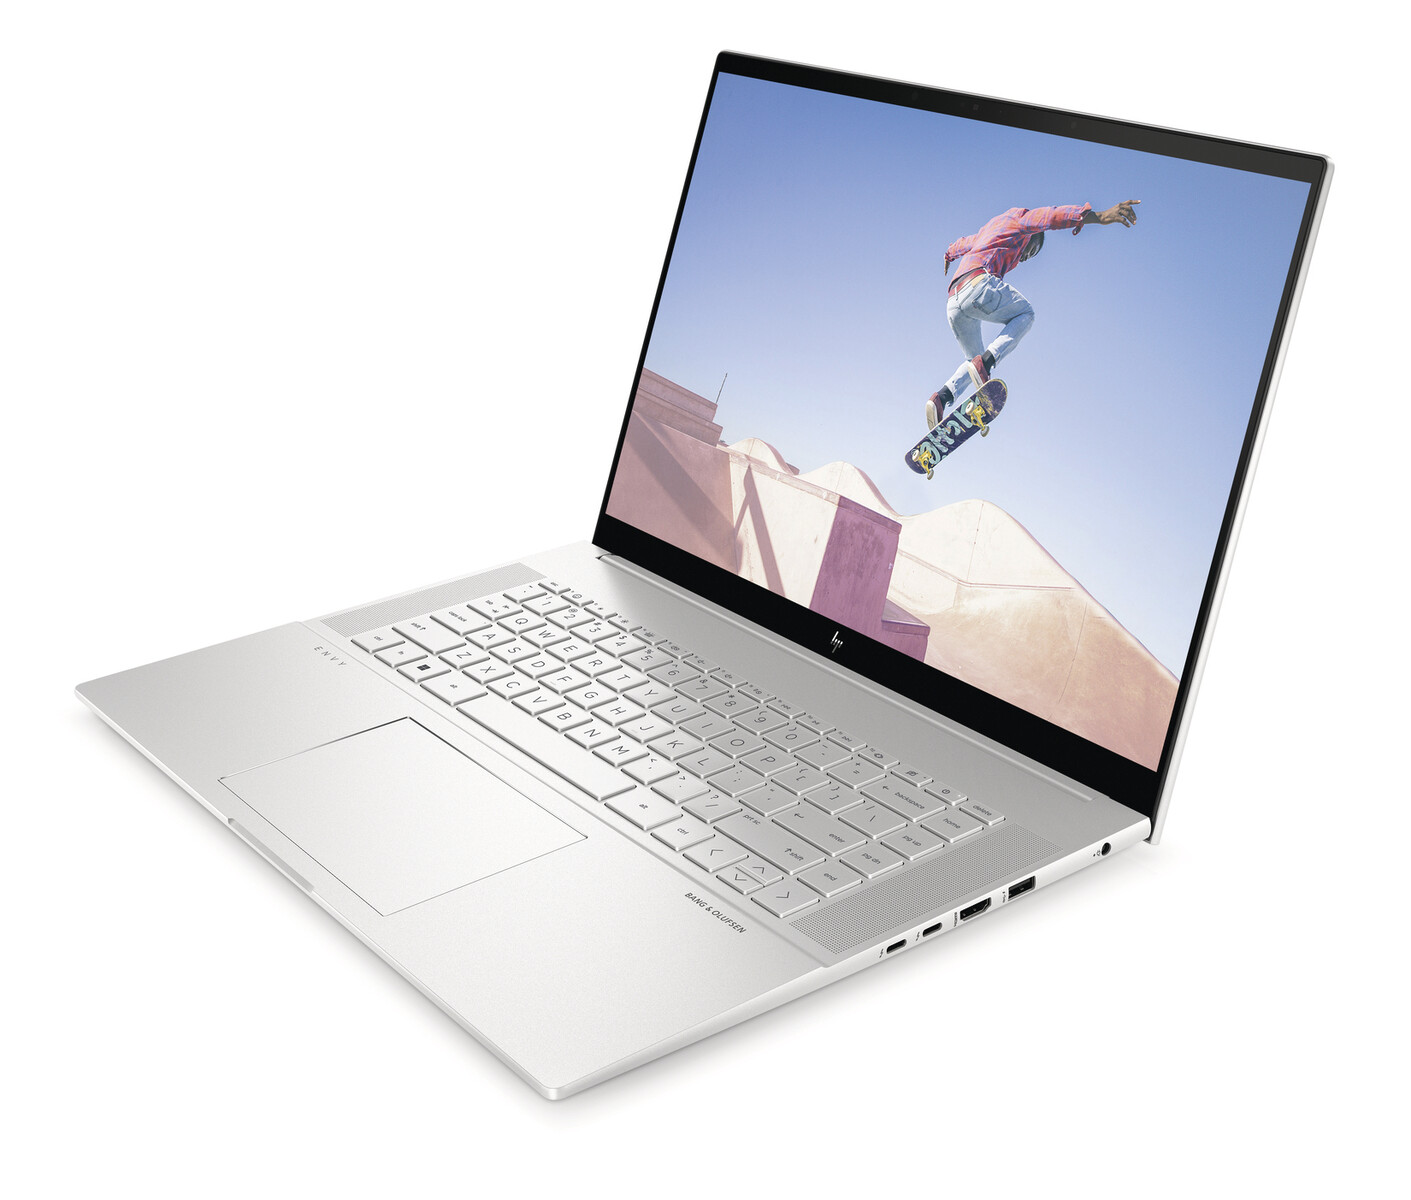 HP Envy 16 announced with Intel Alder Lake processors, Arc 370M GPU, UHD+ 16:10 OLED touchscreen, and more - NotebookCheck.net News